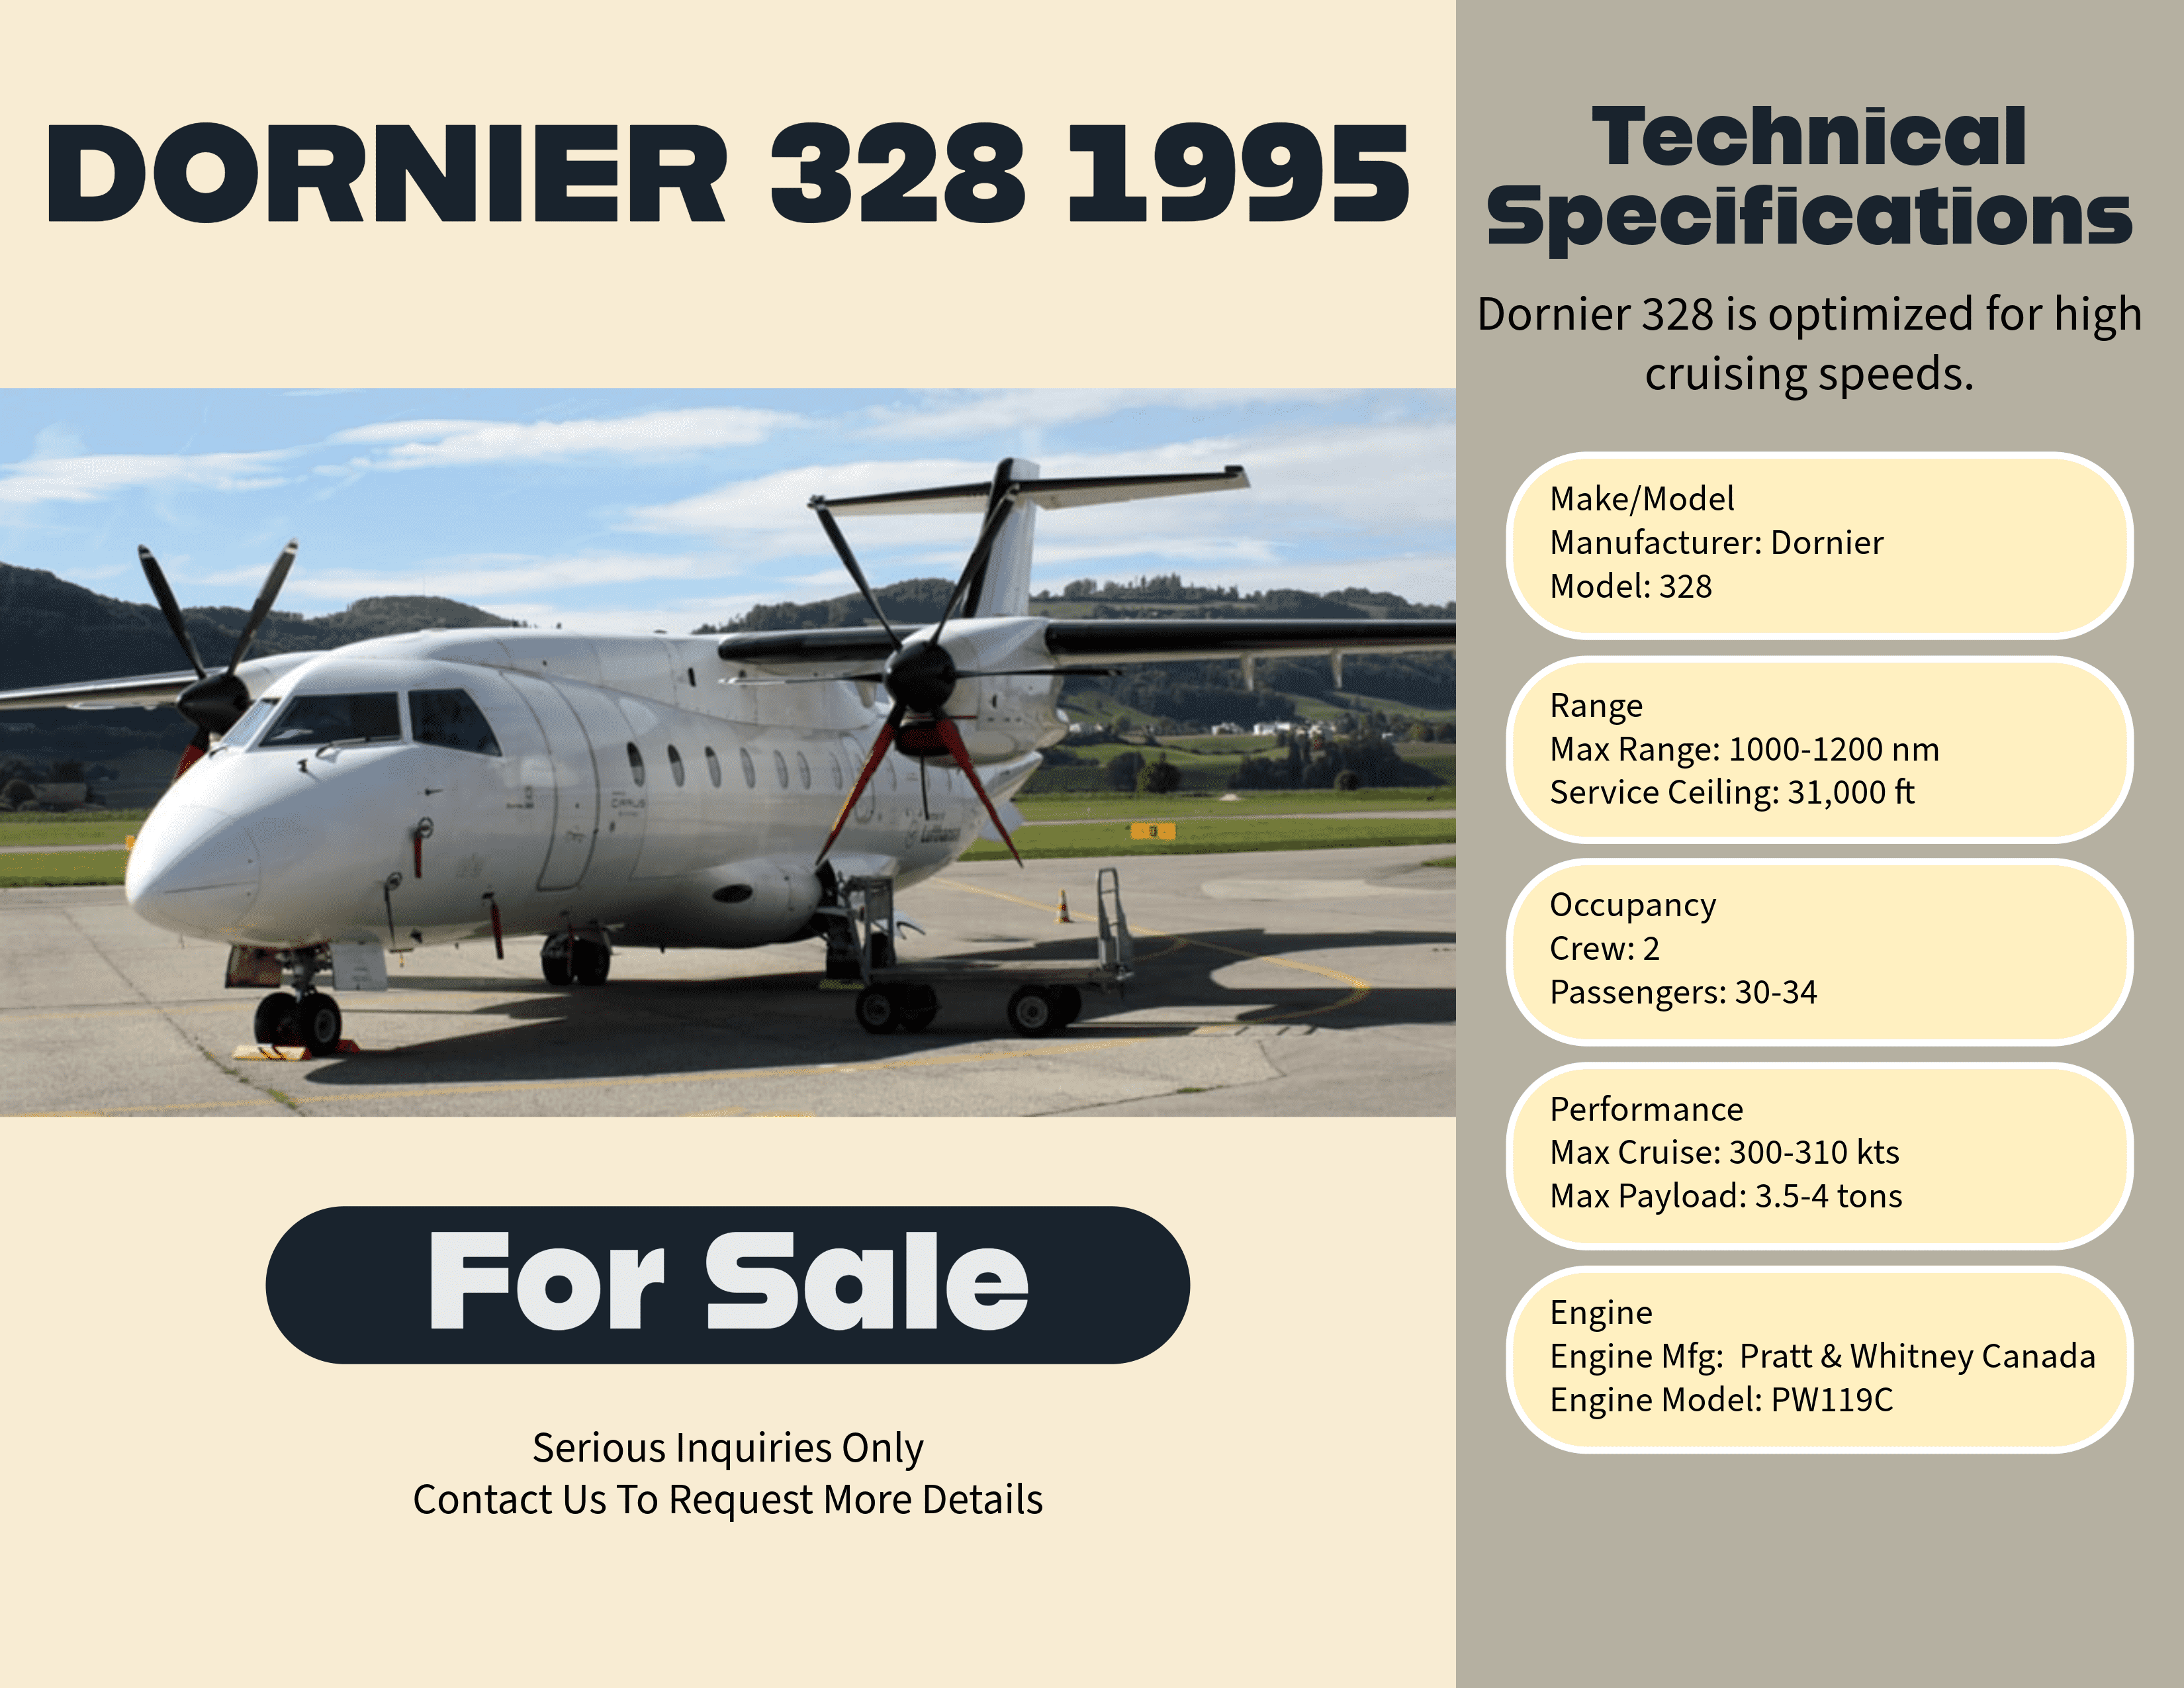 This versatile regional turboprop aircraft is the perfect solution for short-to-medium-haul operations, offering a seating capacity for up to 30 passengers. With a maximum range of approximately 1,000 to 1,200 nautical miles (1,850 to 2,220 kilometers) and a payload capacity of approximately 3.5 to 4.0 tons (7,000 to 8,000 pounds), it ensures seamless connectivity across diverse routes. Equipped with Pratt & Whitney Canada PW119B turboprop engines, this aircraft delivers optimal fuel efficiency, allowing operators to minimize operational costs while maximizing revenue potential. Its well-appointed cabin ensures passenger comfort, making every journey a pleasant experience.